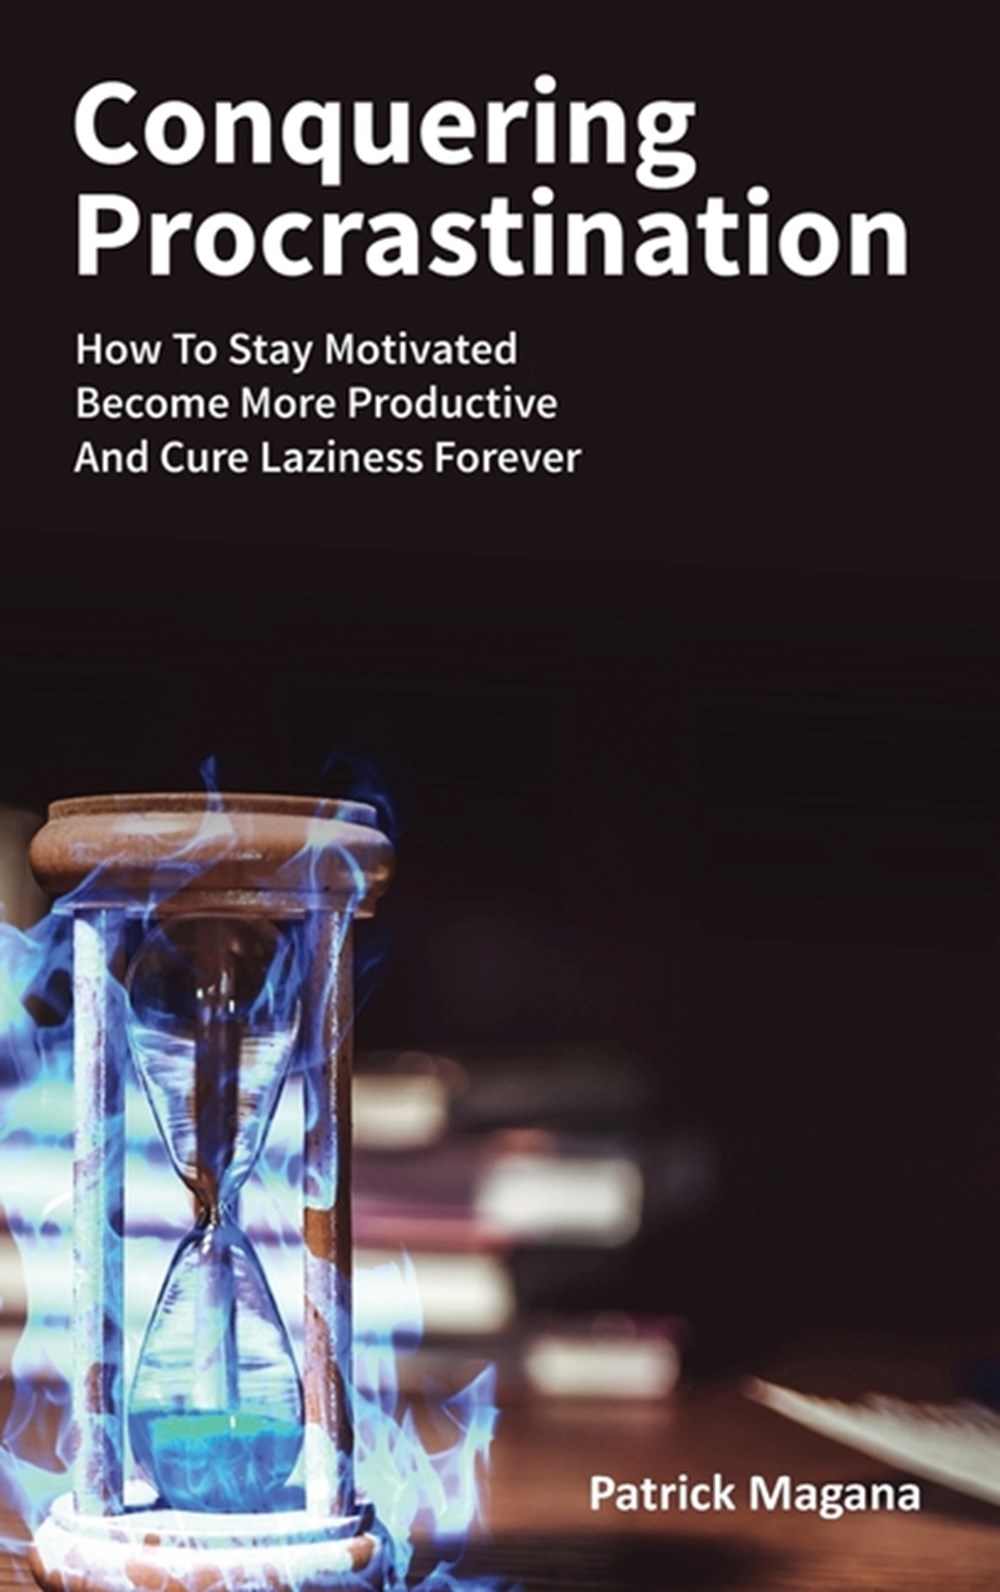 Conquering Procrastination: How To Stay Motivated, Become More Productive And Cure Laziness Forever